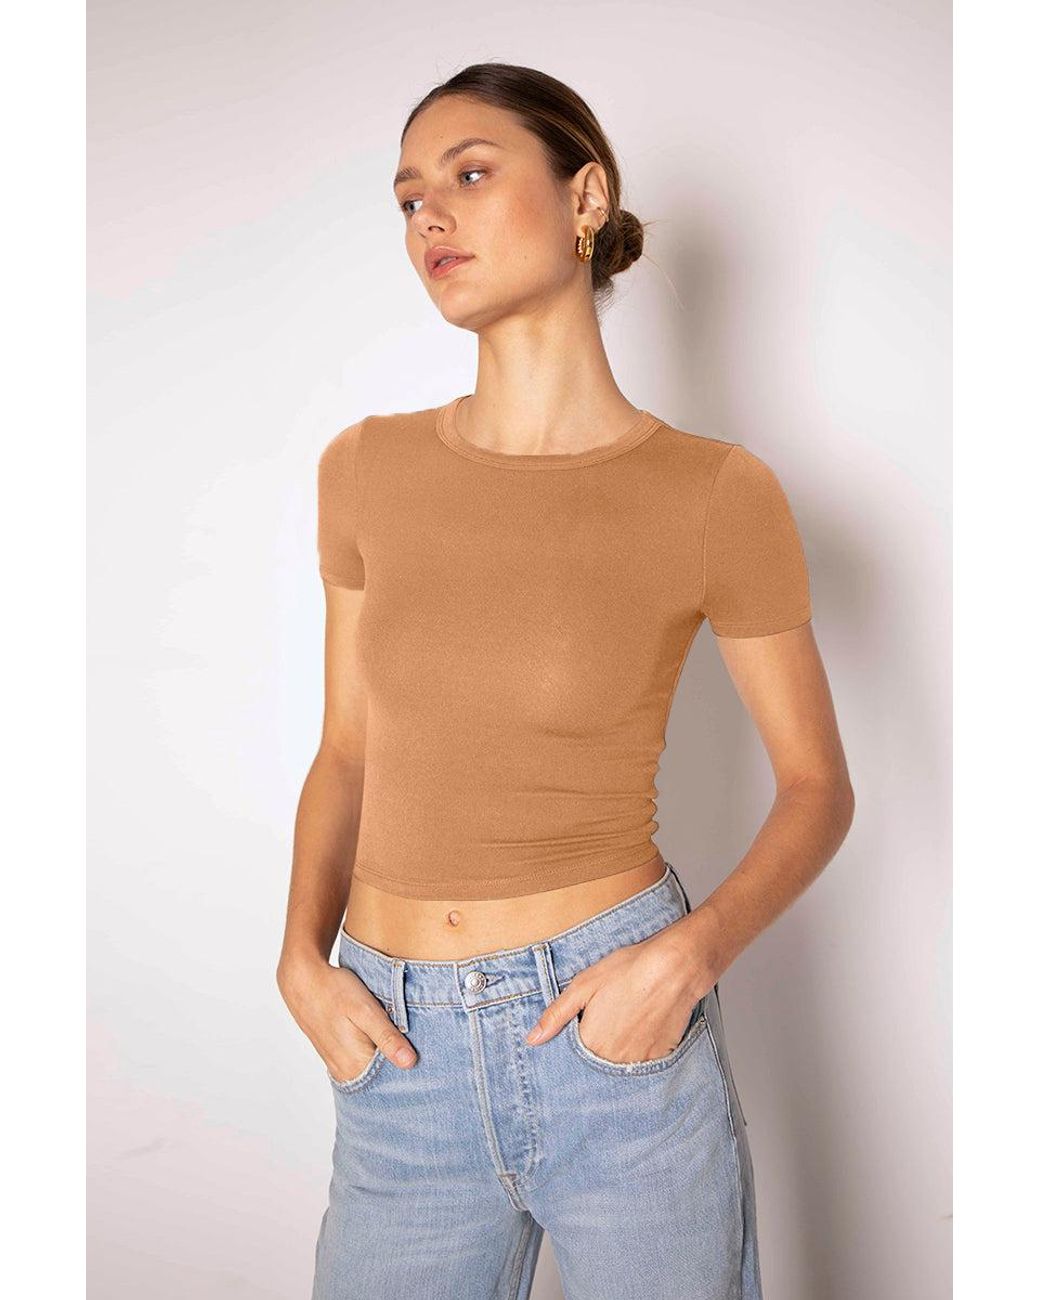 The Range No Bra Club Cropped Ss Crew in Blue